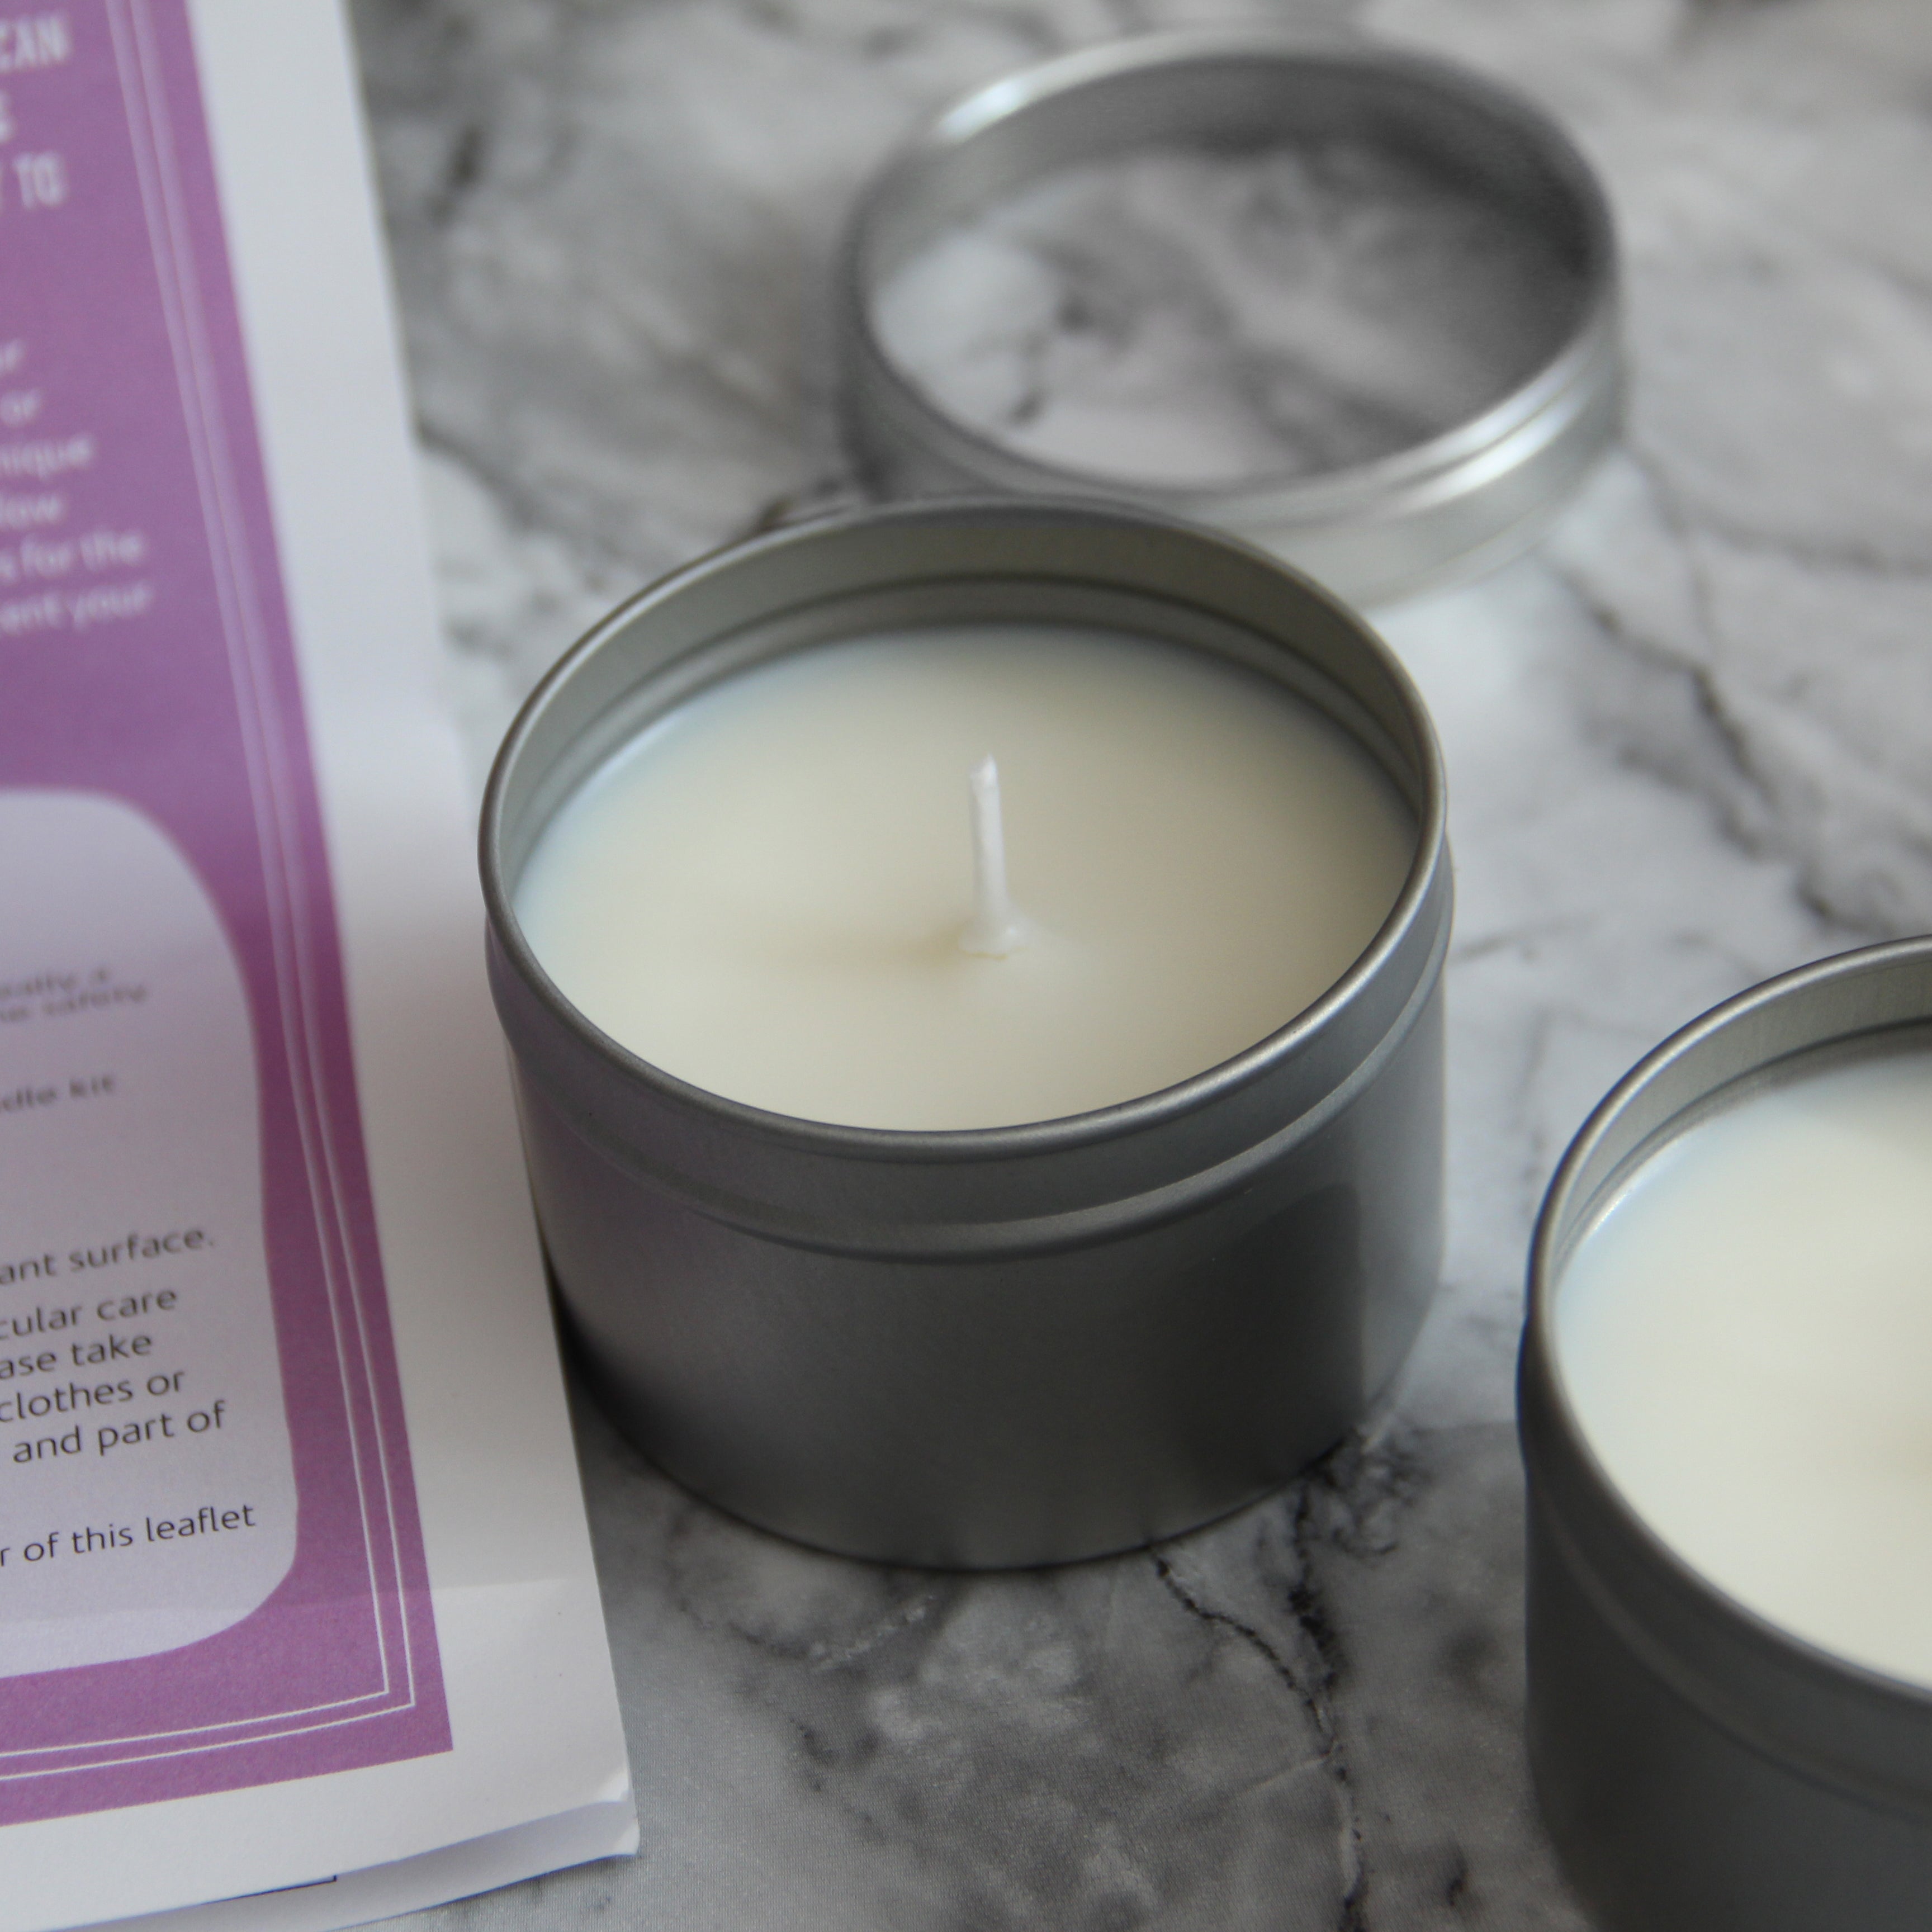 Simple scented candles could be your new go-to DIY gift